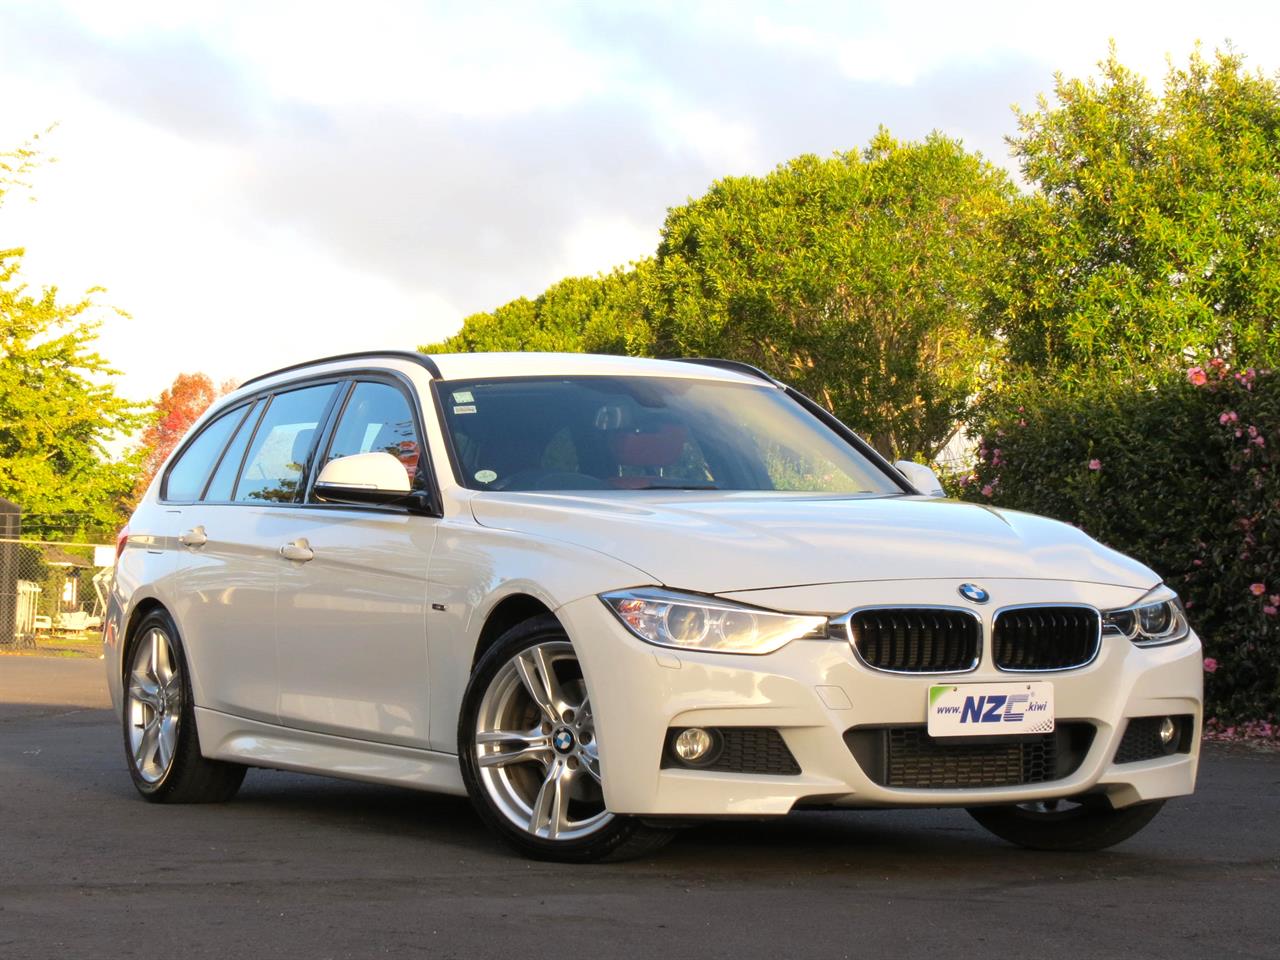 NZC 2013 BMW 320d just arrived to Auckland